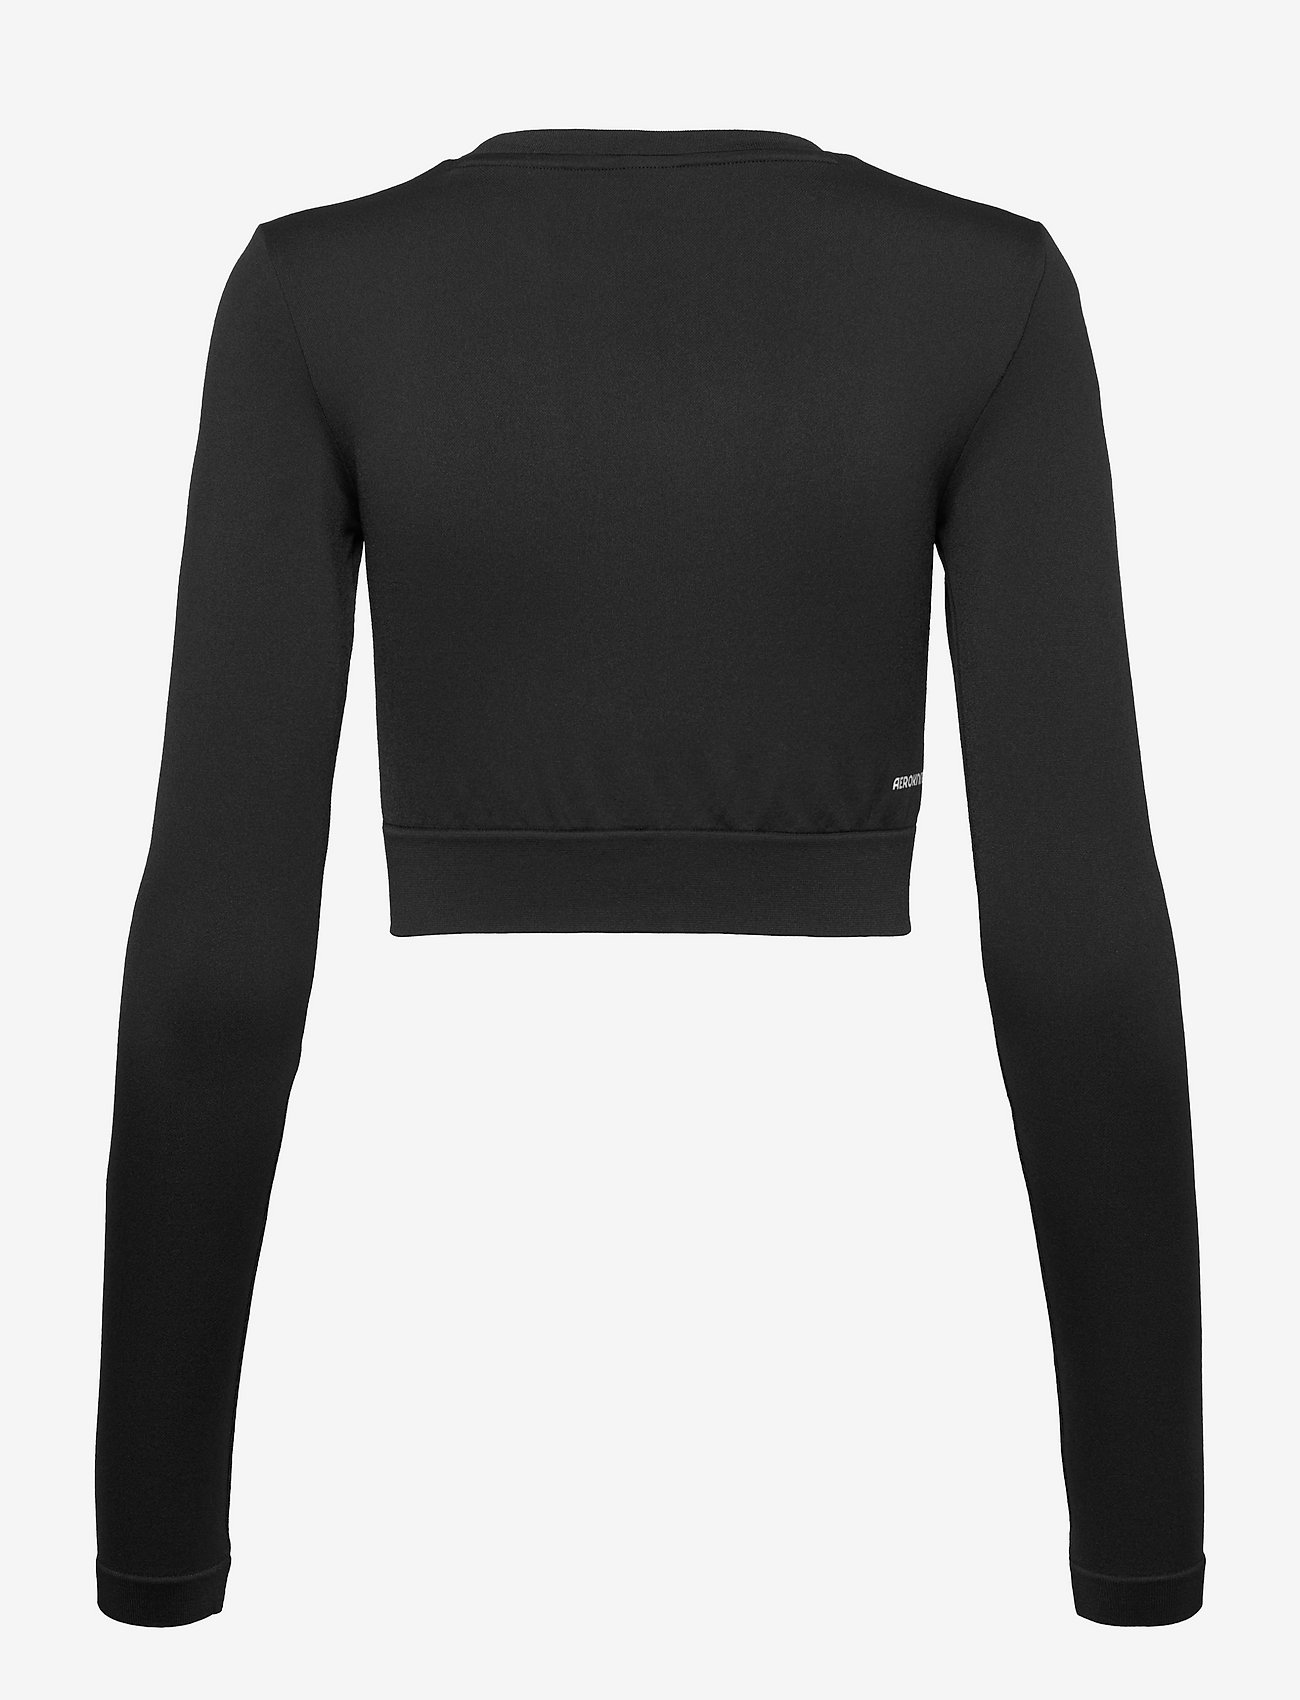 adidas Performance - adidas AEROKNIT Seamless Fitted Cropped Long-Sleeve Top - navel shirts - black/white - 1